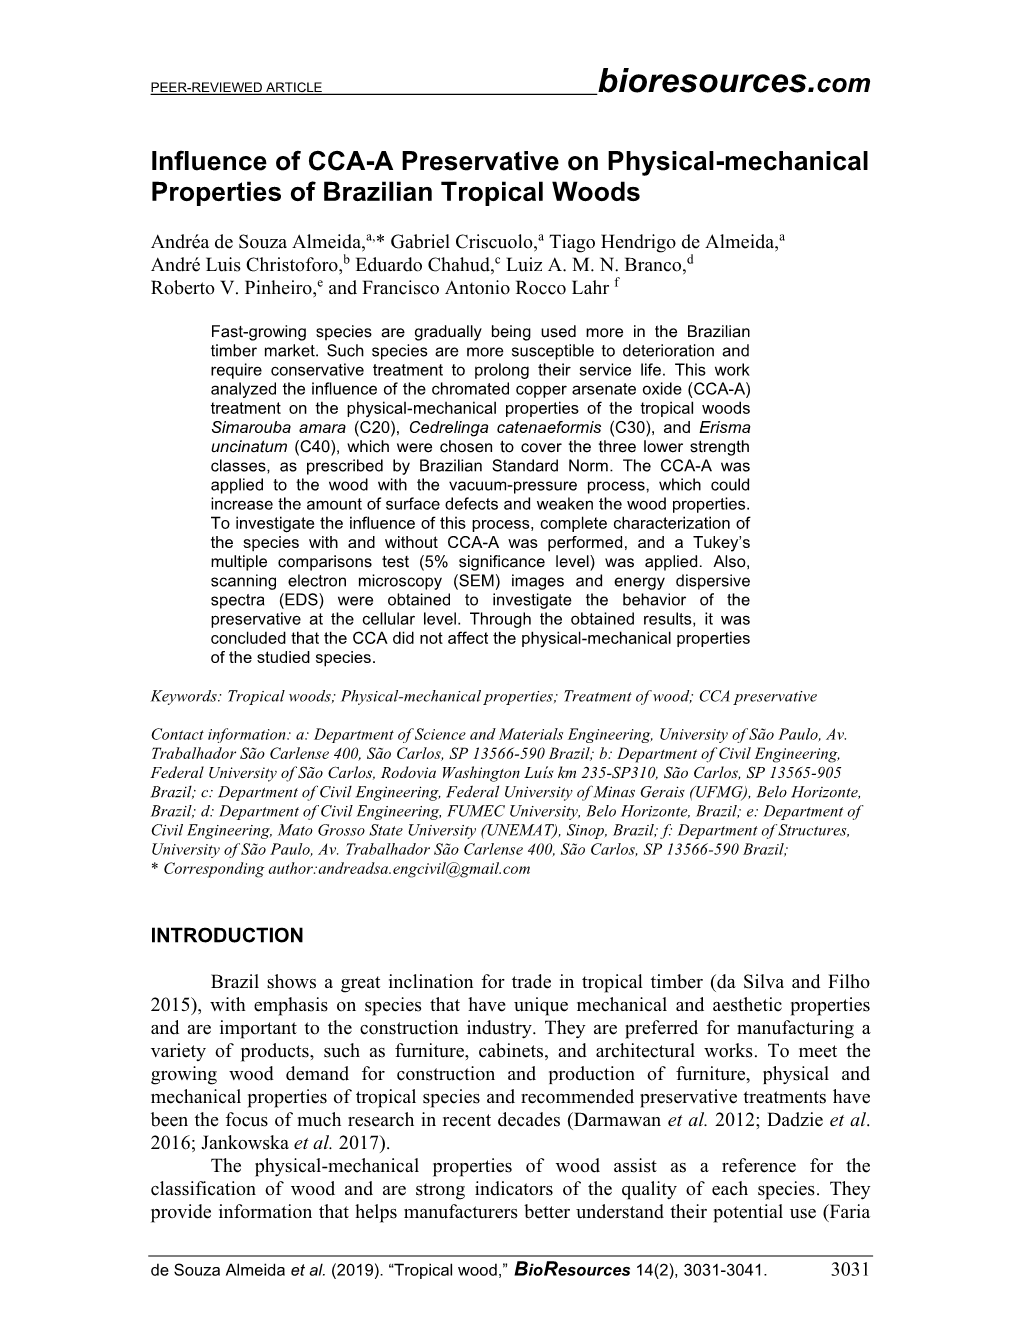 Influence of CCA-A Preservative on Physical-Mechanical Properties of Brazilian Tropical Woods